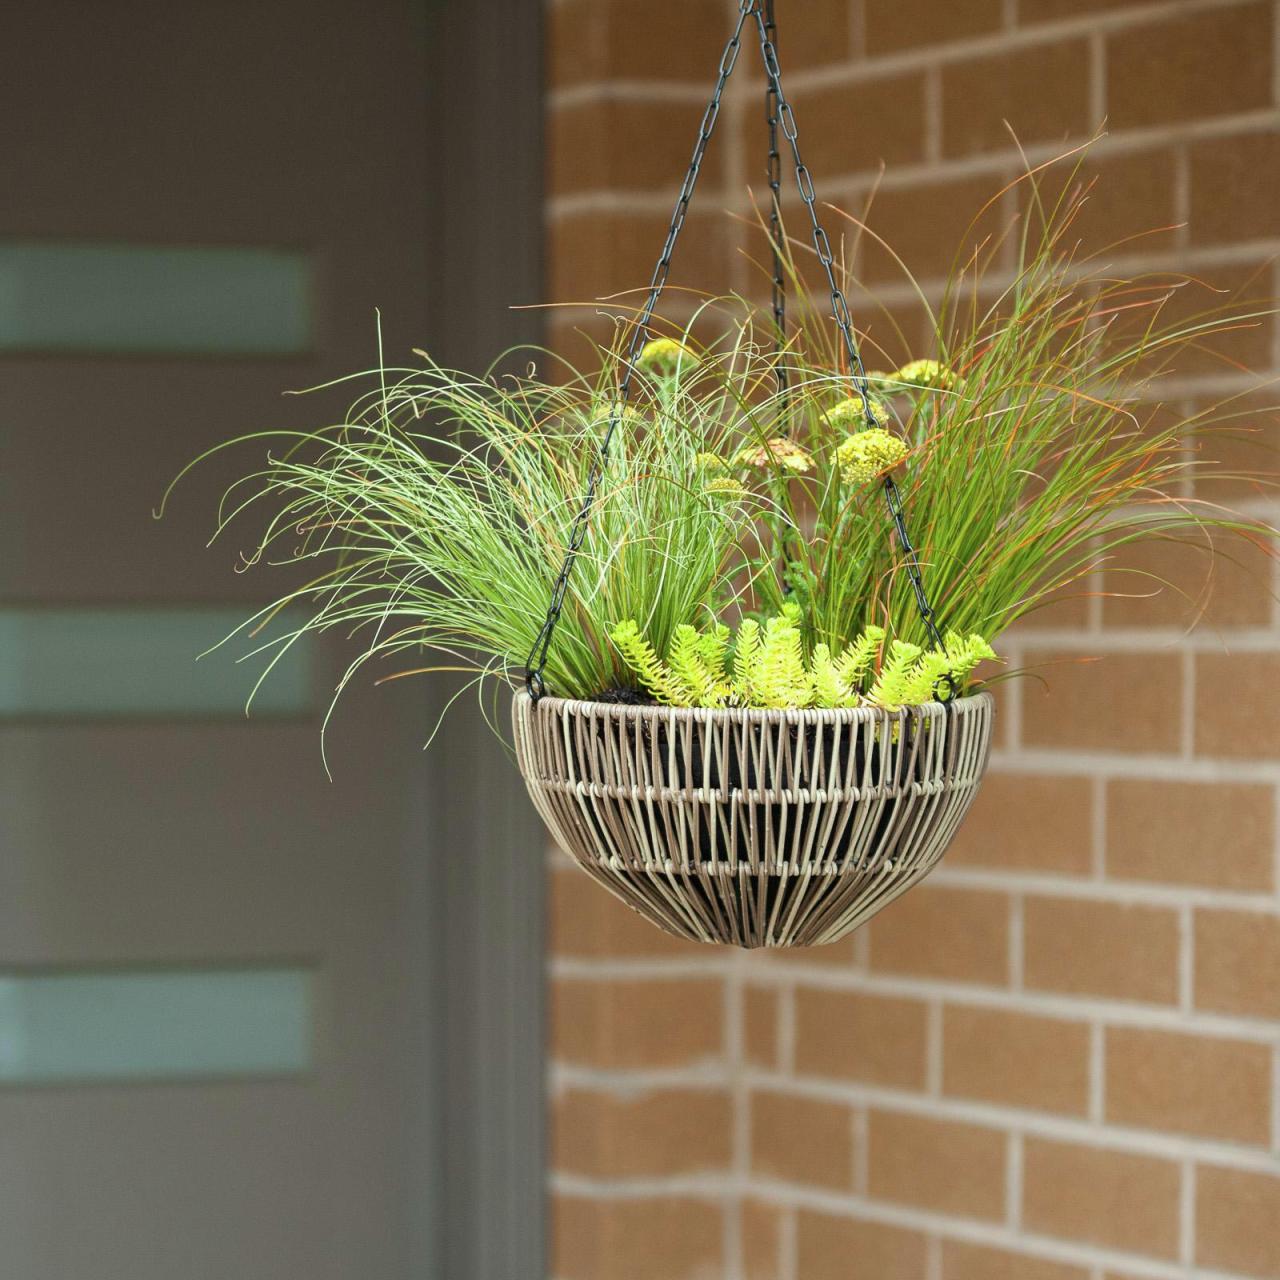 Hanging Plants Indoor | Hanging Baskets at Bunnings: A Guide to Varieties, Selection, and Care